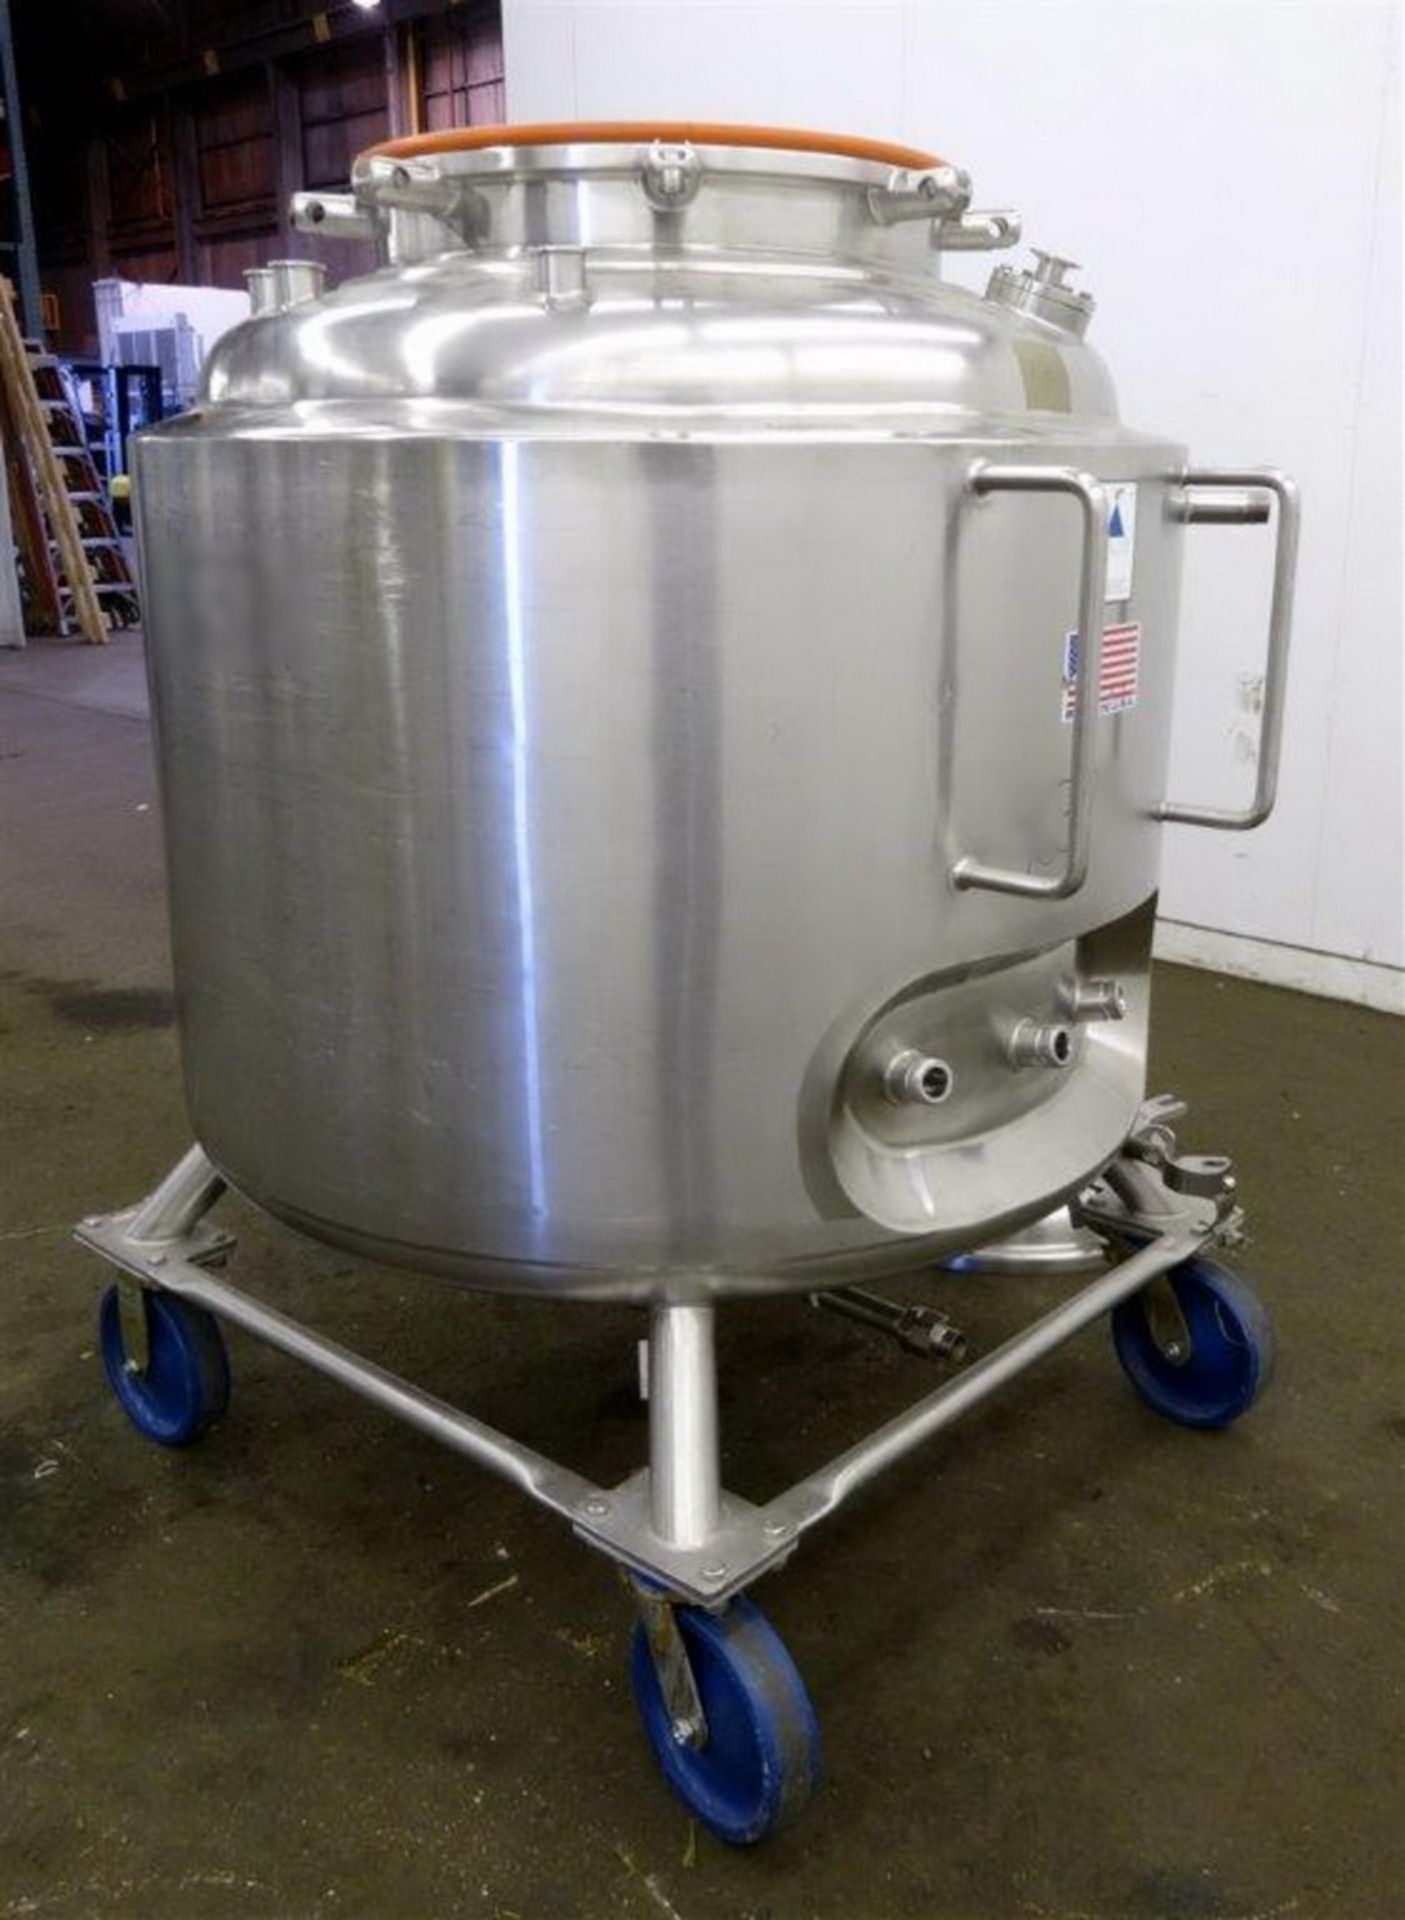 Precision Stainless 105 gallon (400 Liter) 316L Stainless Steel Jacketed Reactor, S/N 5458-2